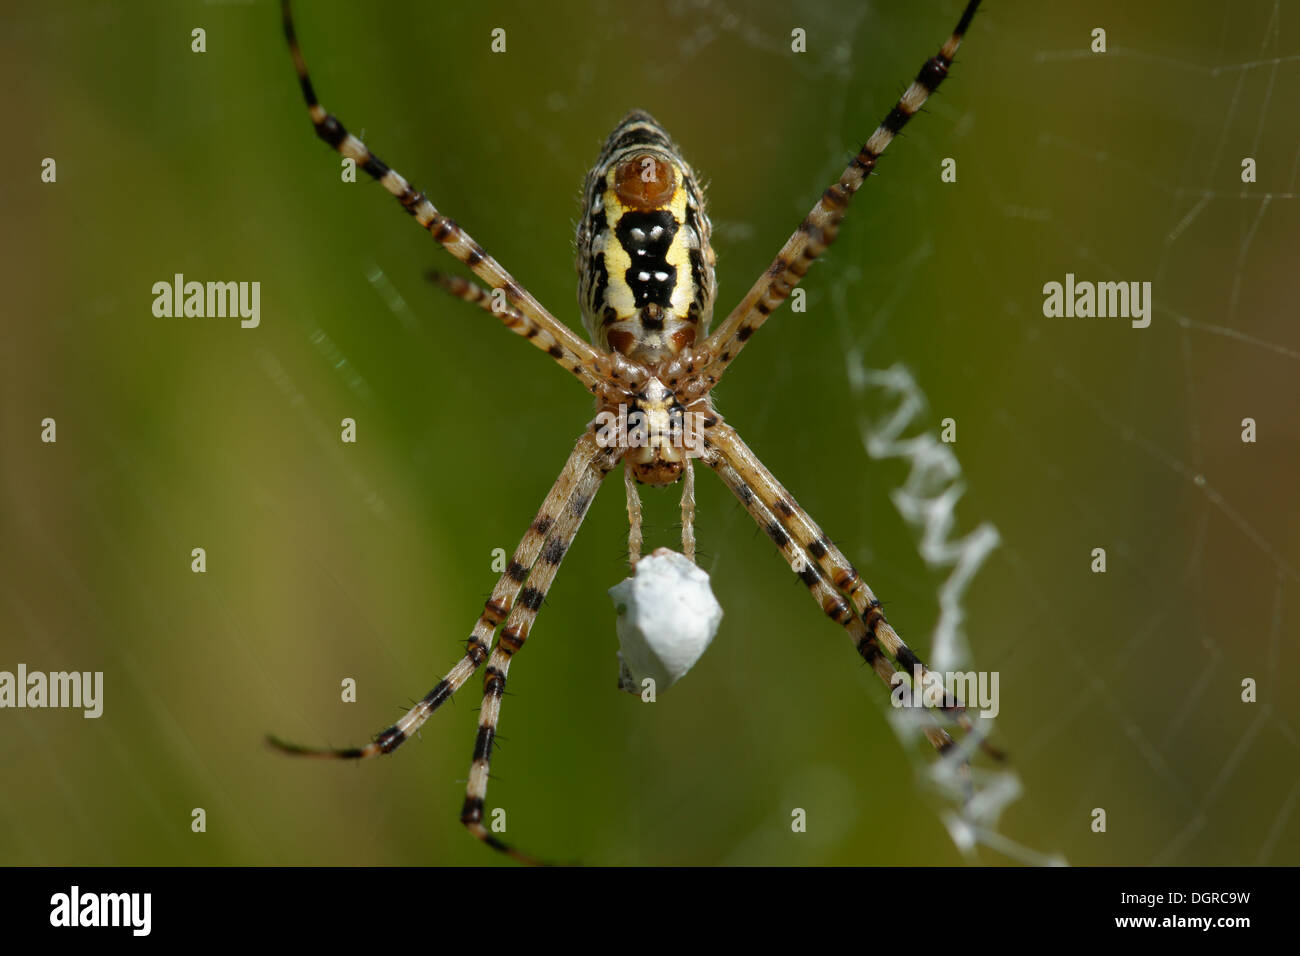 Macro image of argiope spider with prey wrapped in silk Stock Photo